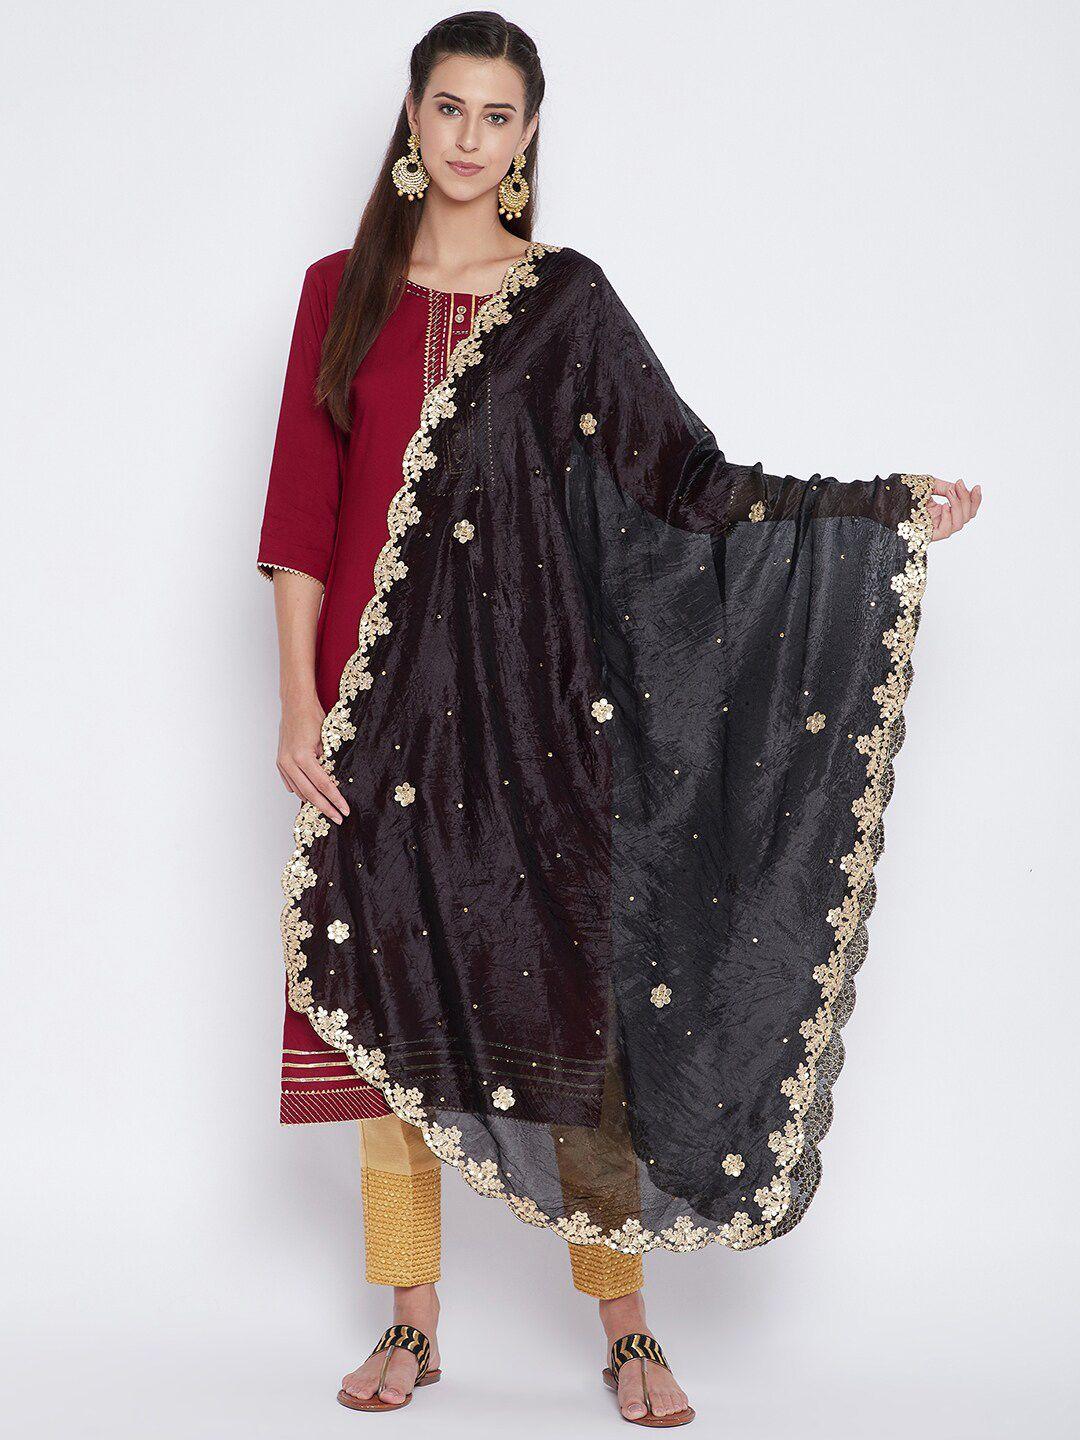 clora creation women black & gold-toned embroidered dupatta with beads and stones